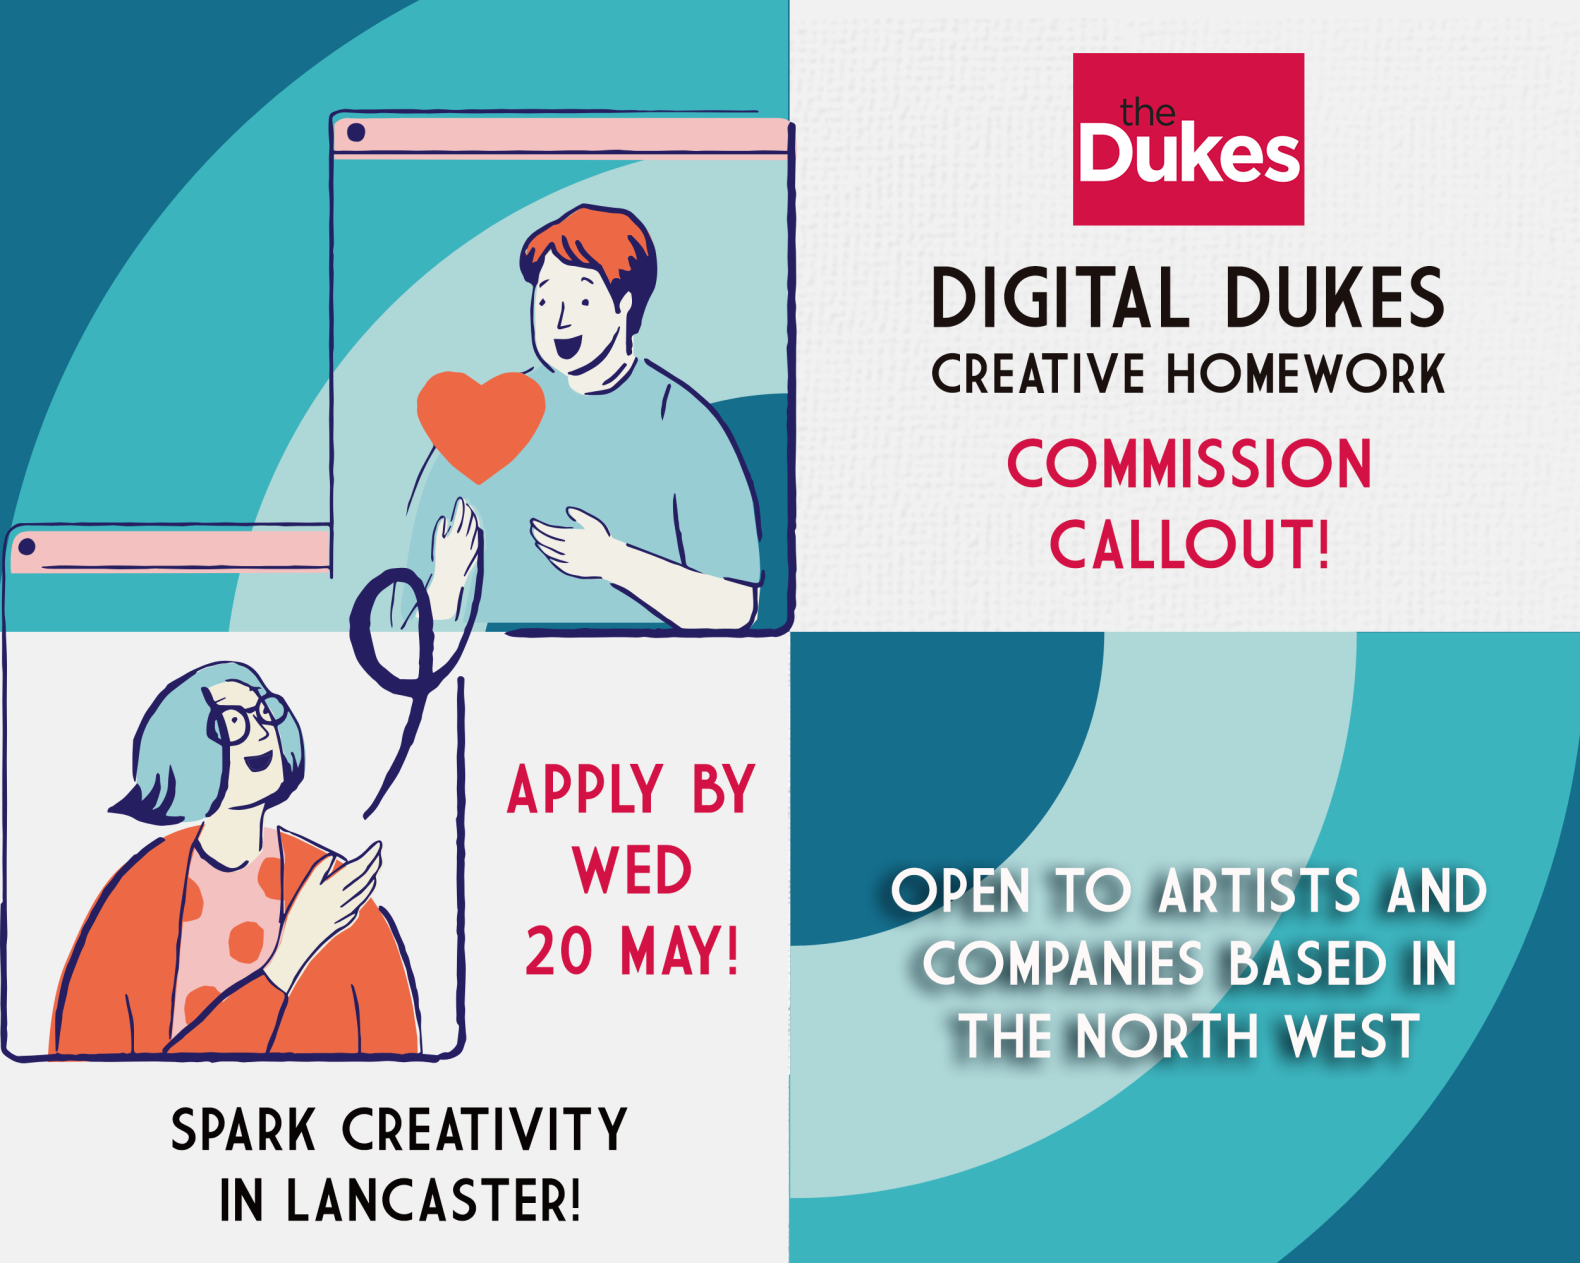 Callout to creatives: Dukes to commission 3 artists and companies